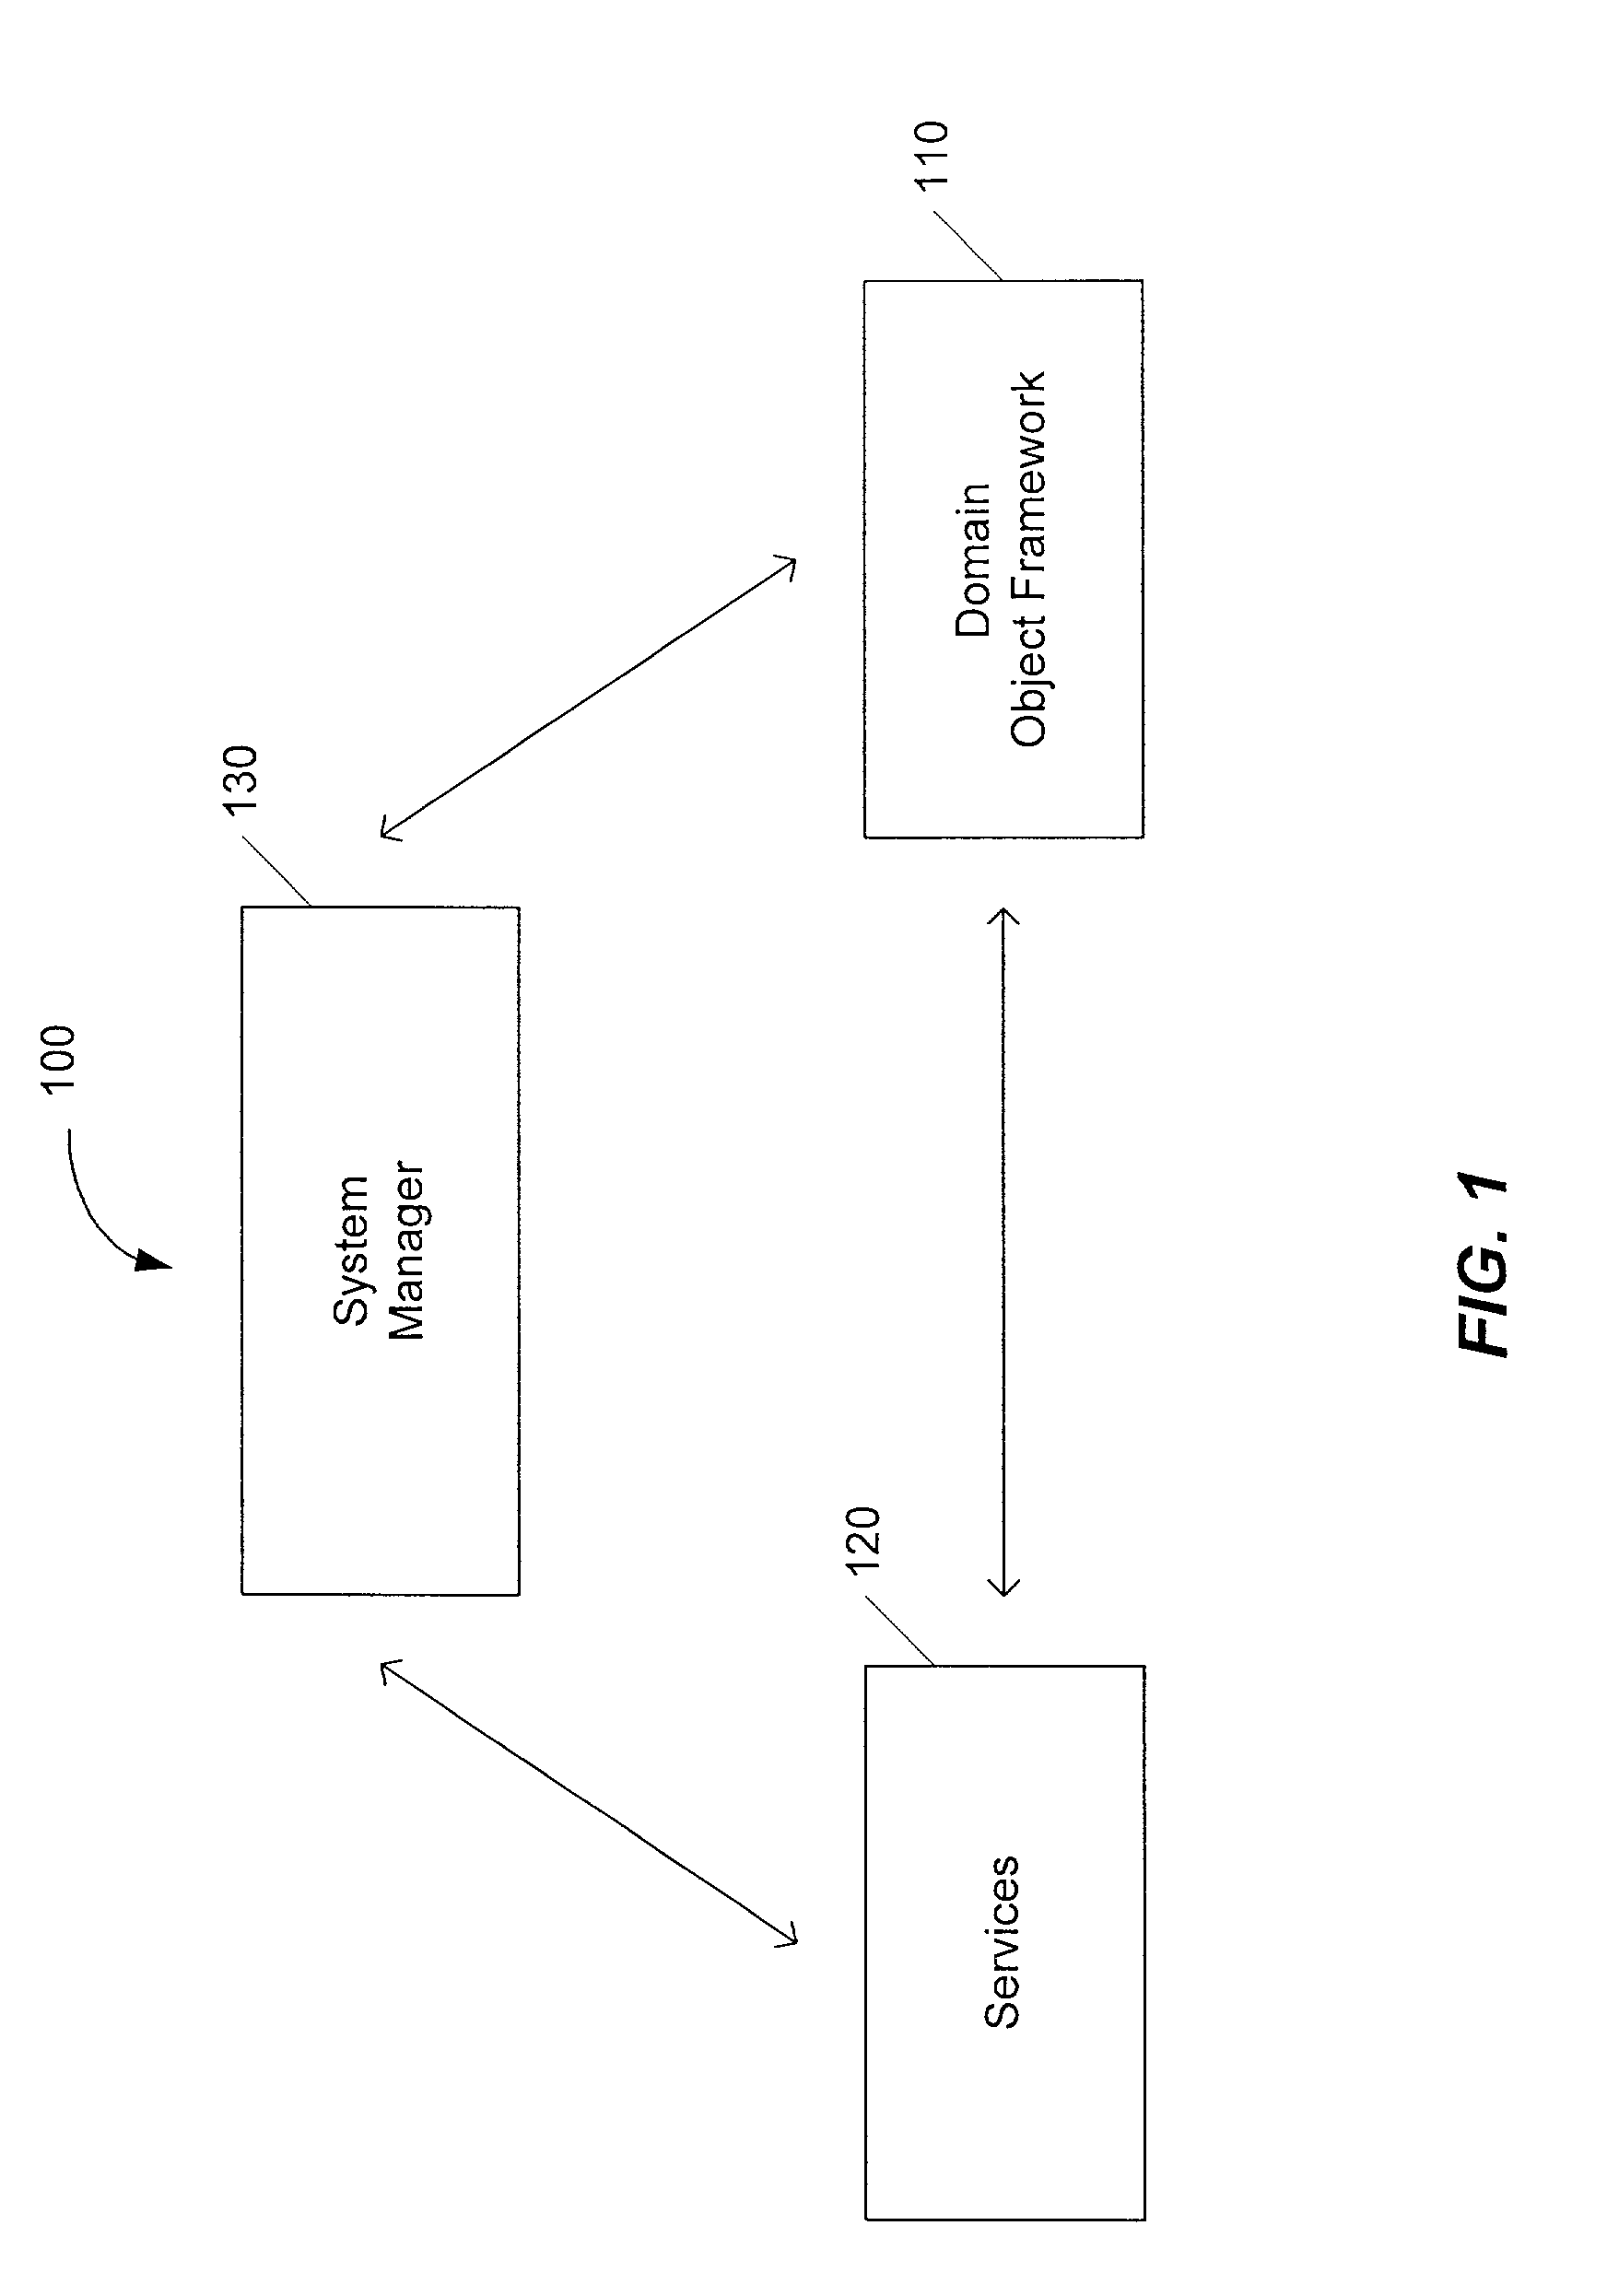 System for integrating data between a plurality of software applications in a factory environment